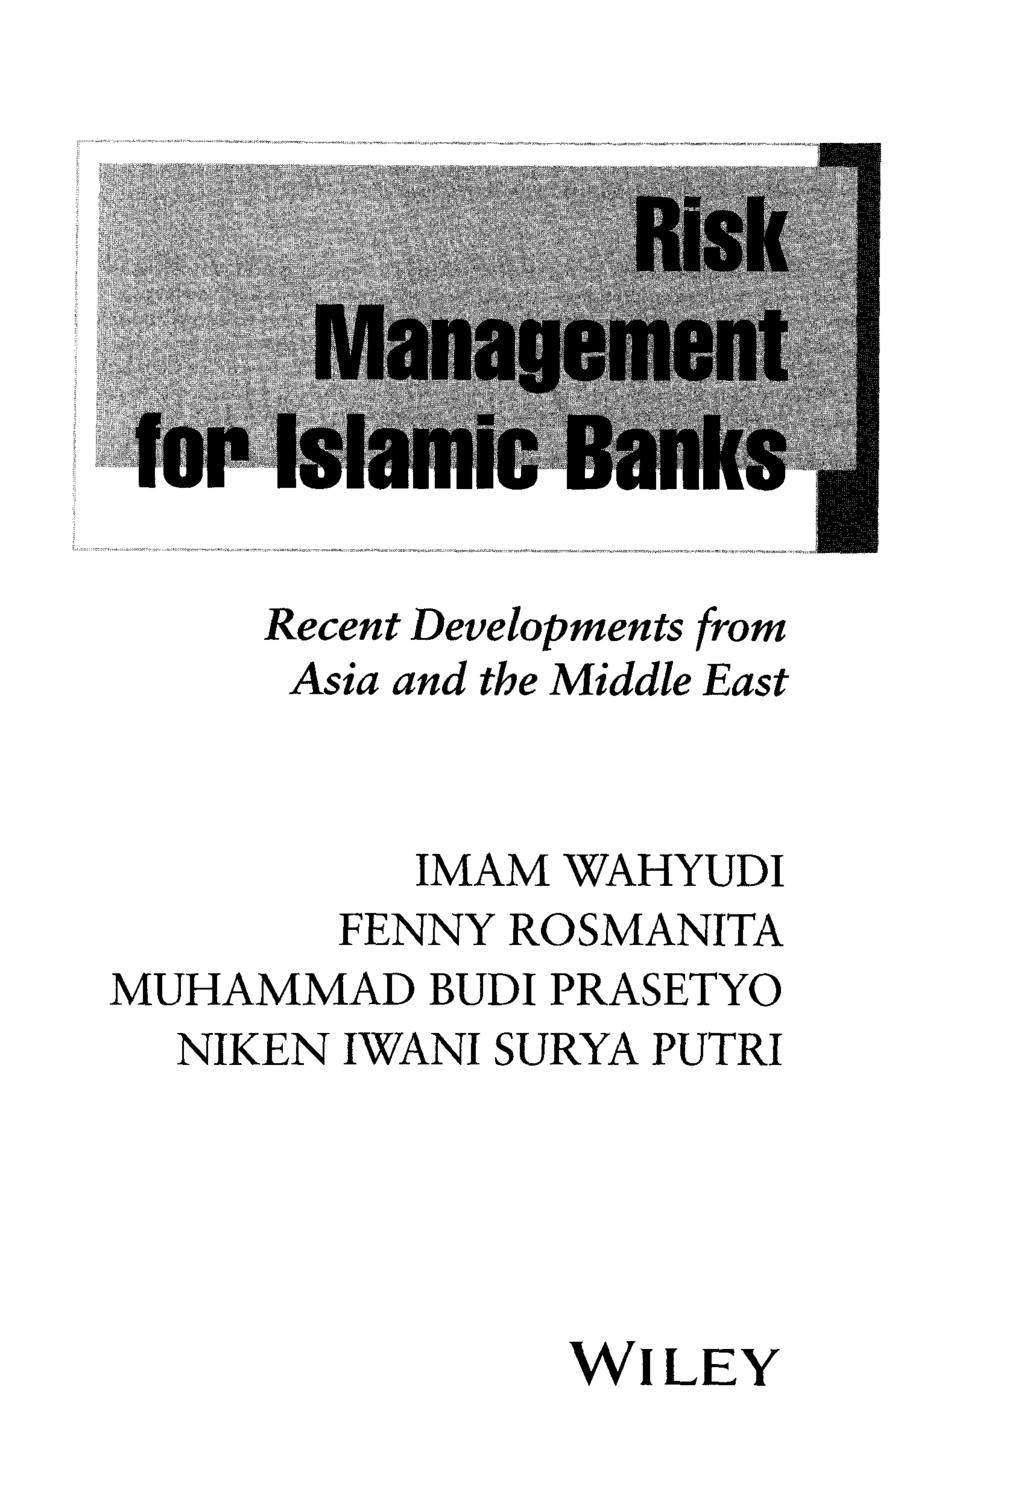 Recent Developments front Asia and the Middle East IMAM WAHYUDI